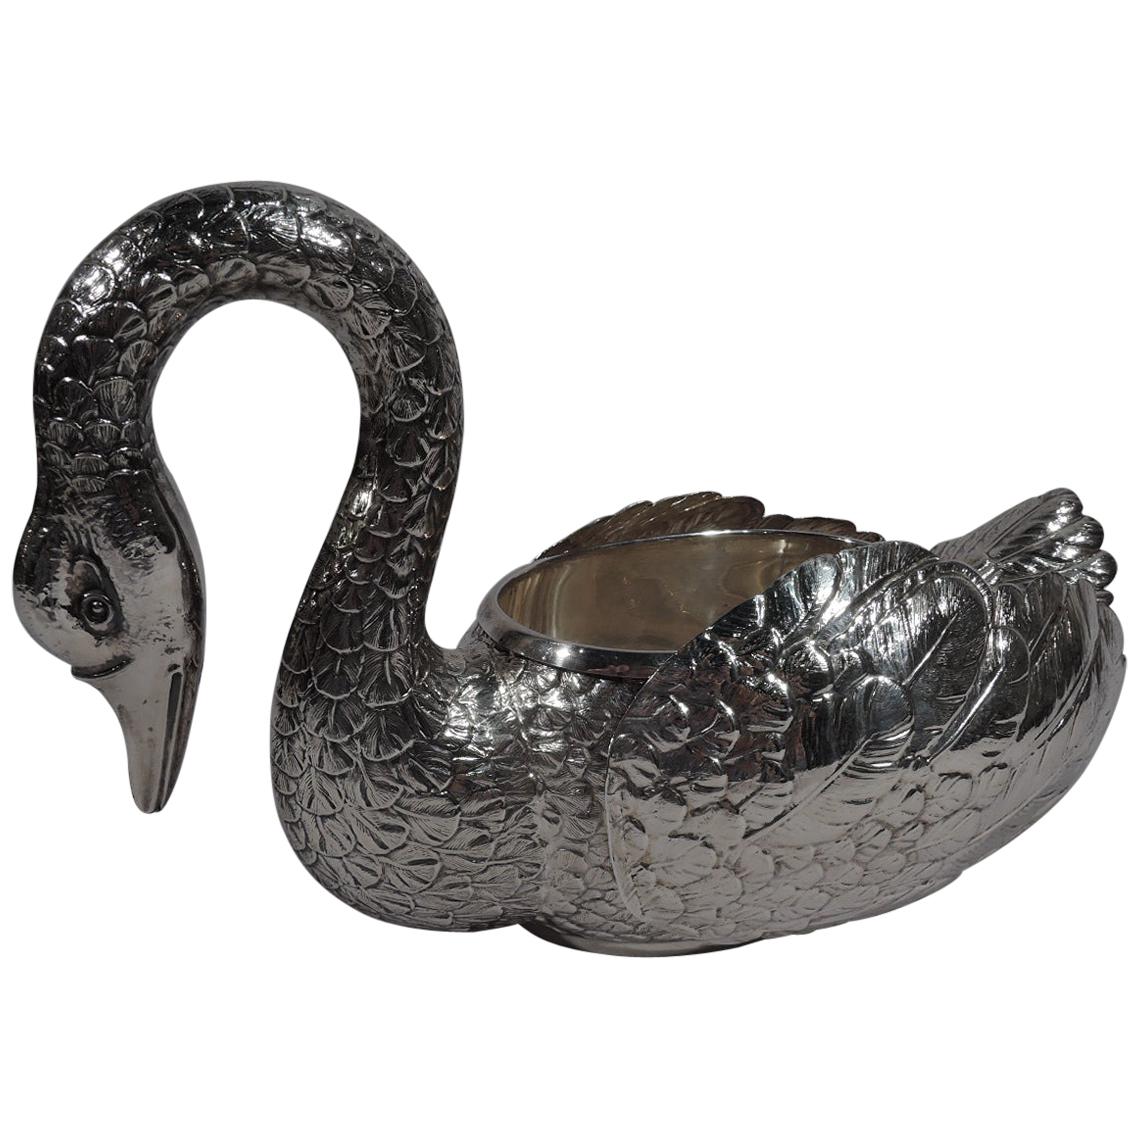 Stately and Elegant Sterling Silver Swan Bowl with Hinged Wings